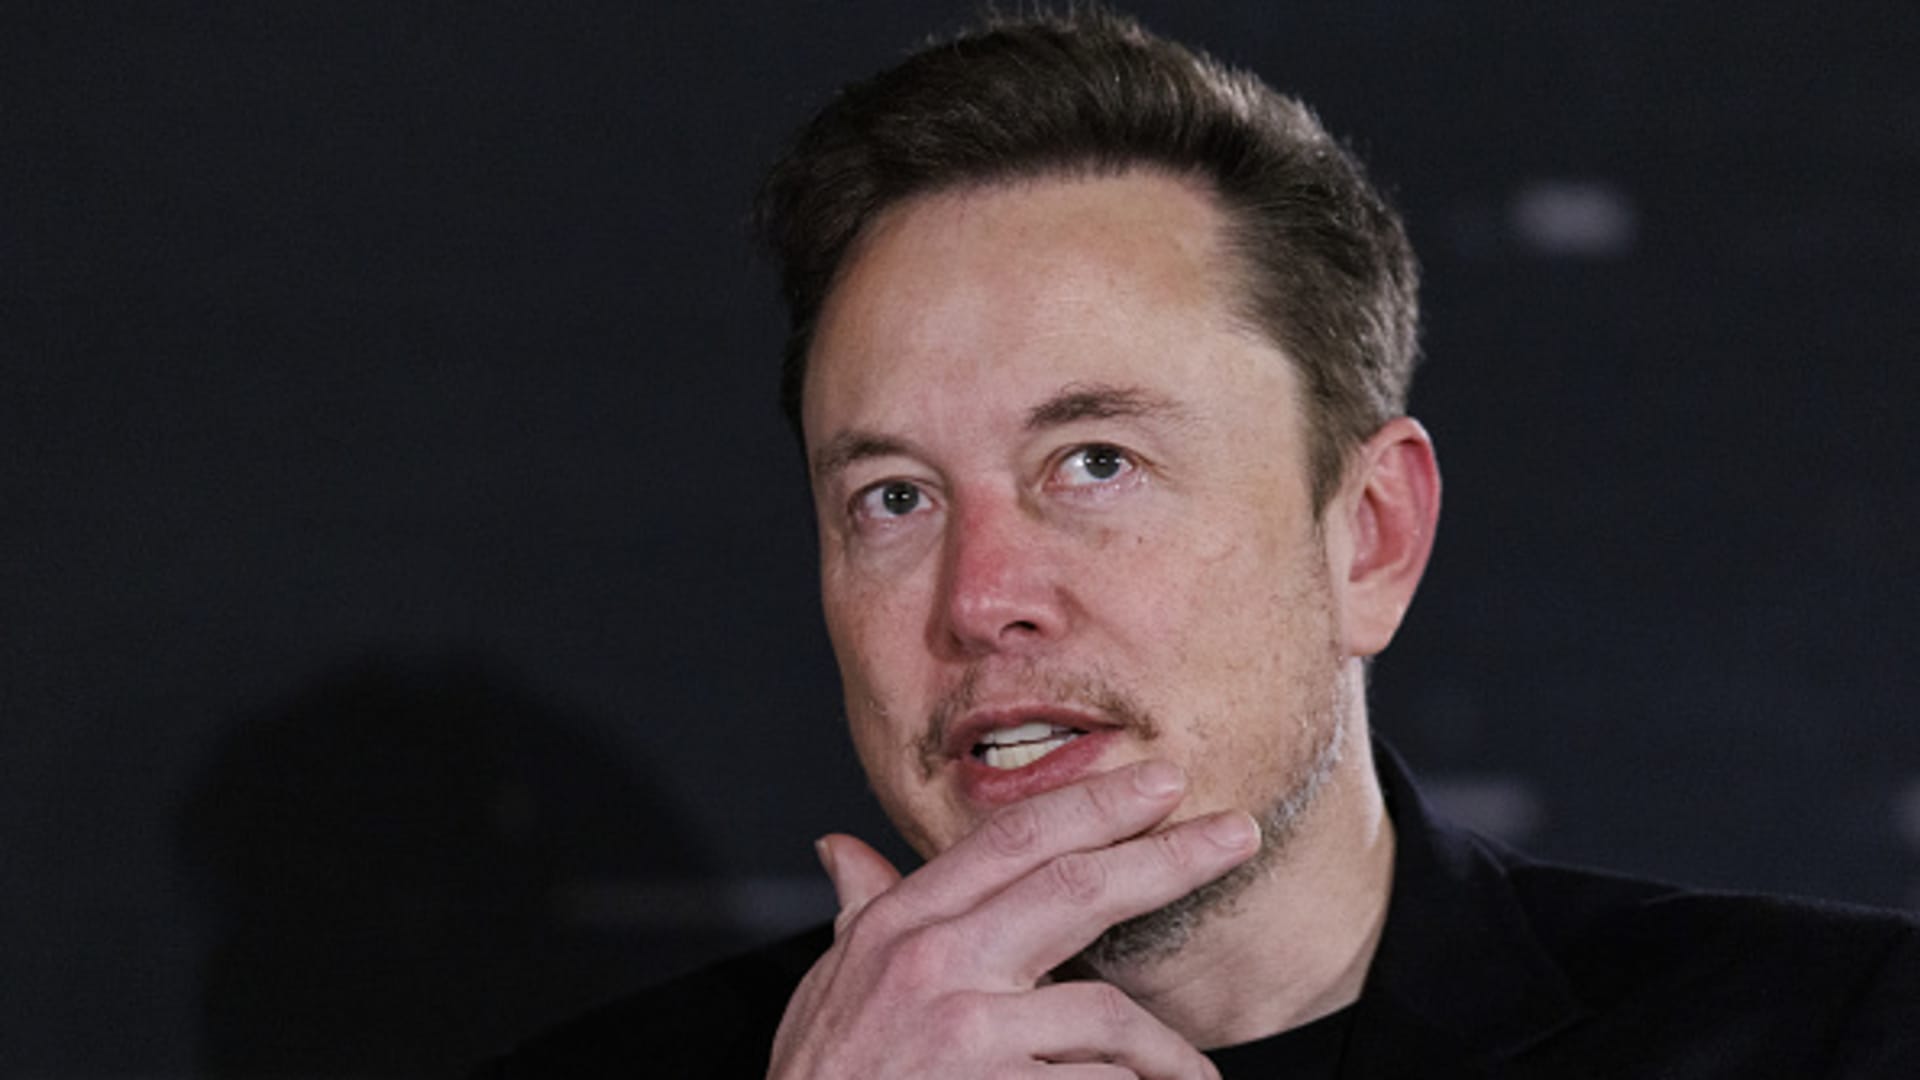 White House blasts Elon Musk for promoting 'Antisemitic and racist hate'